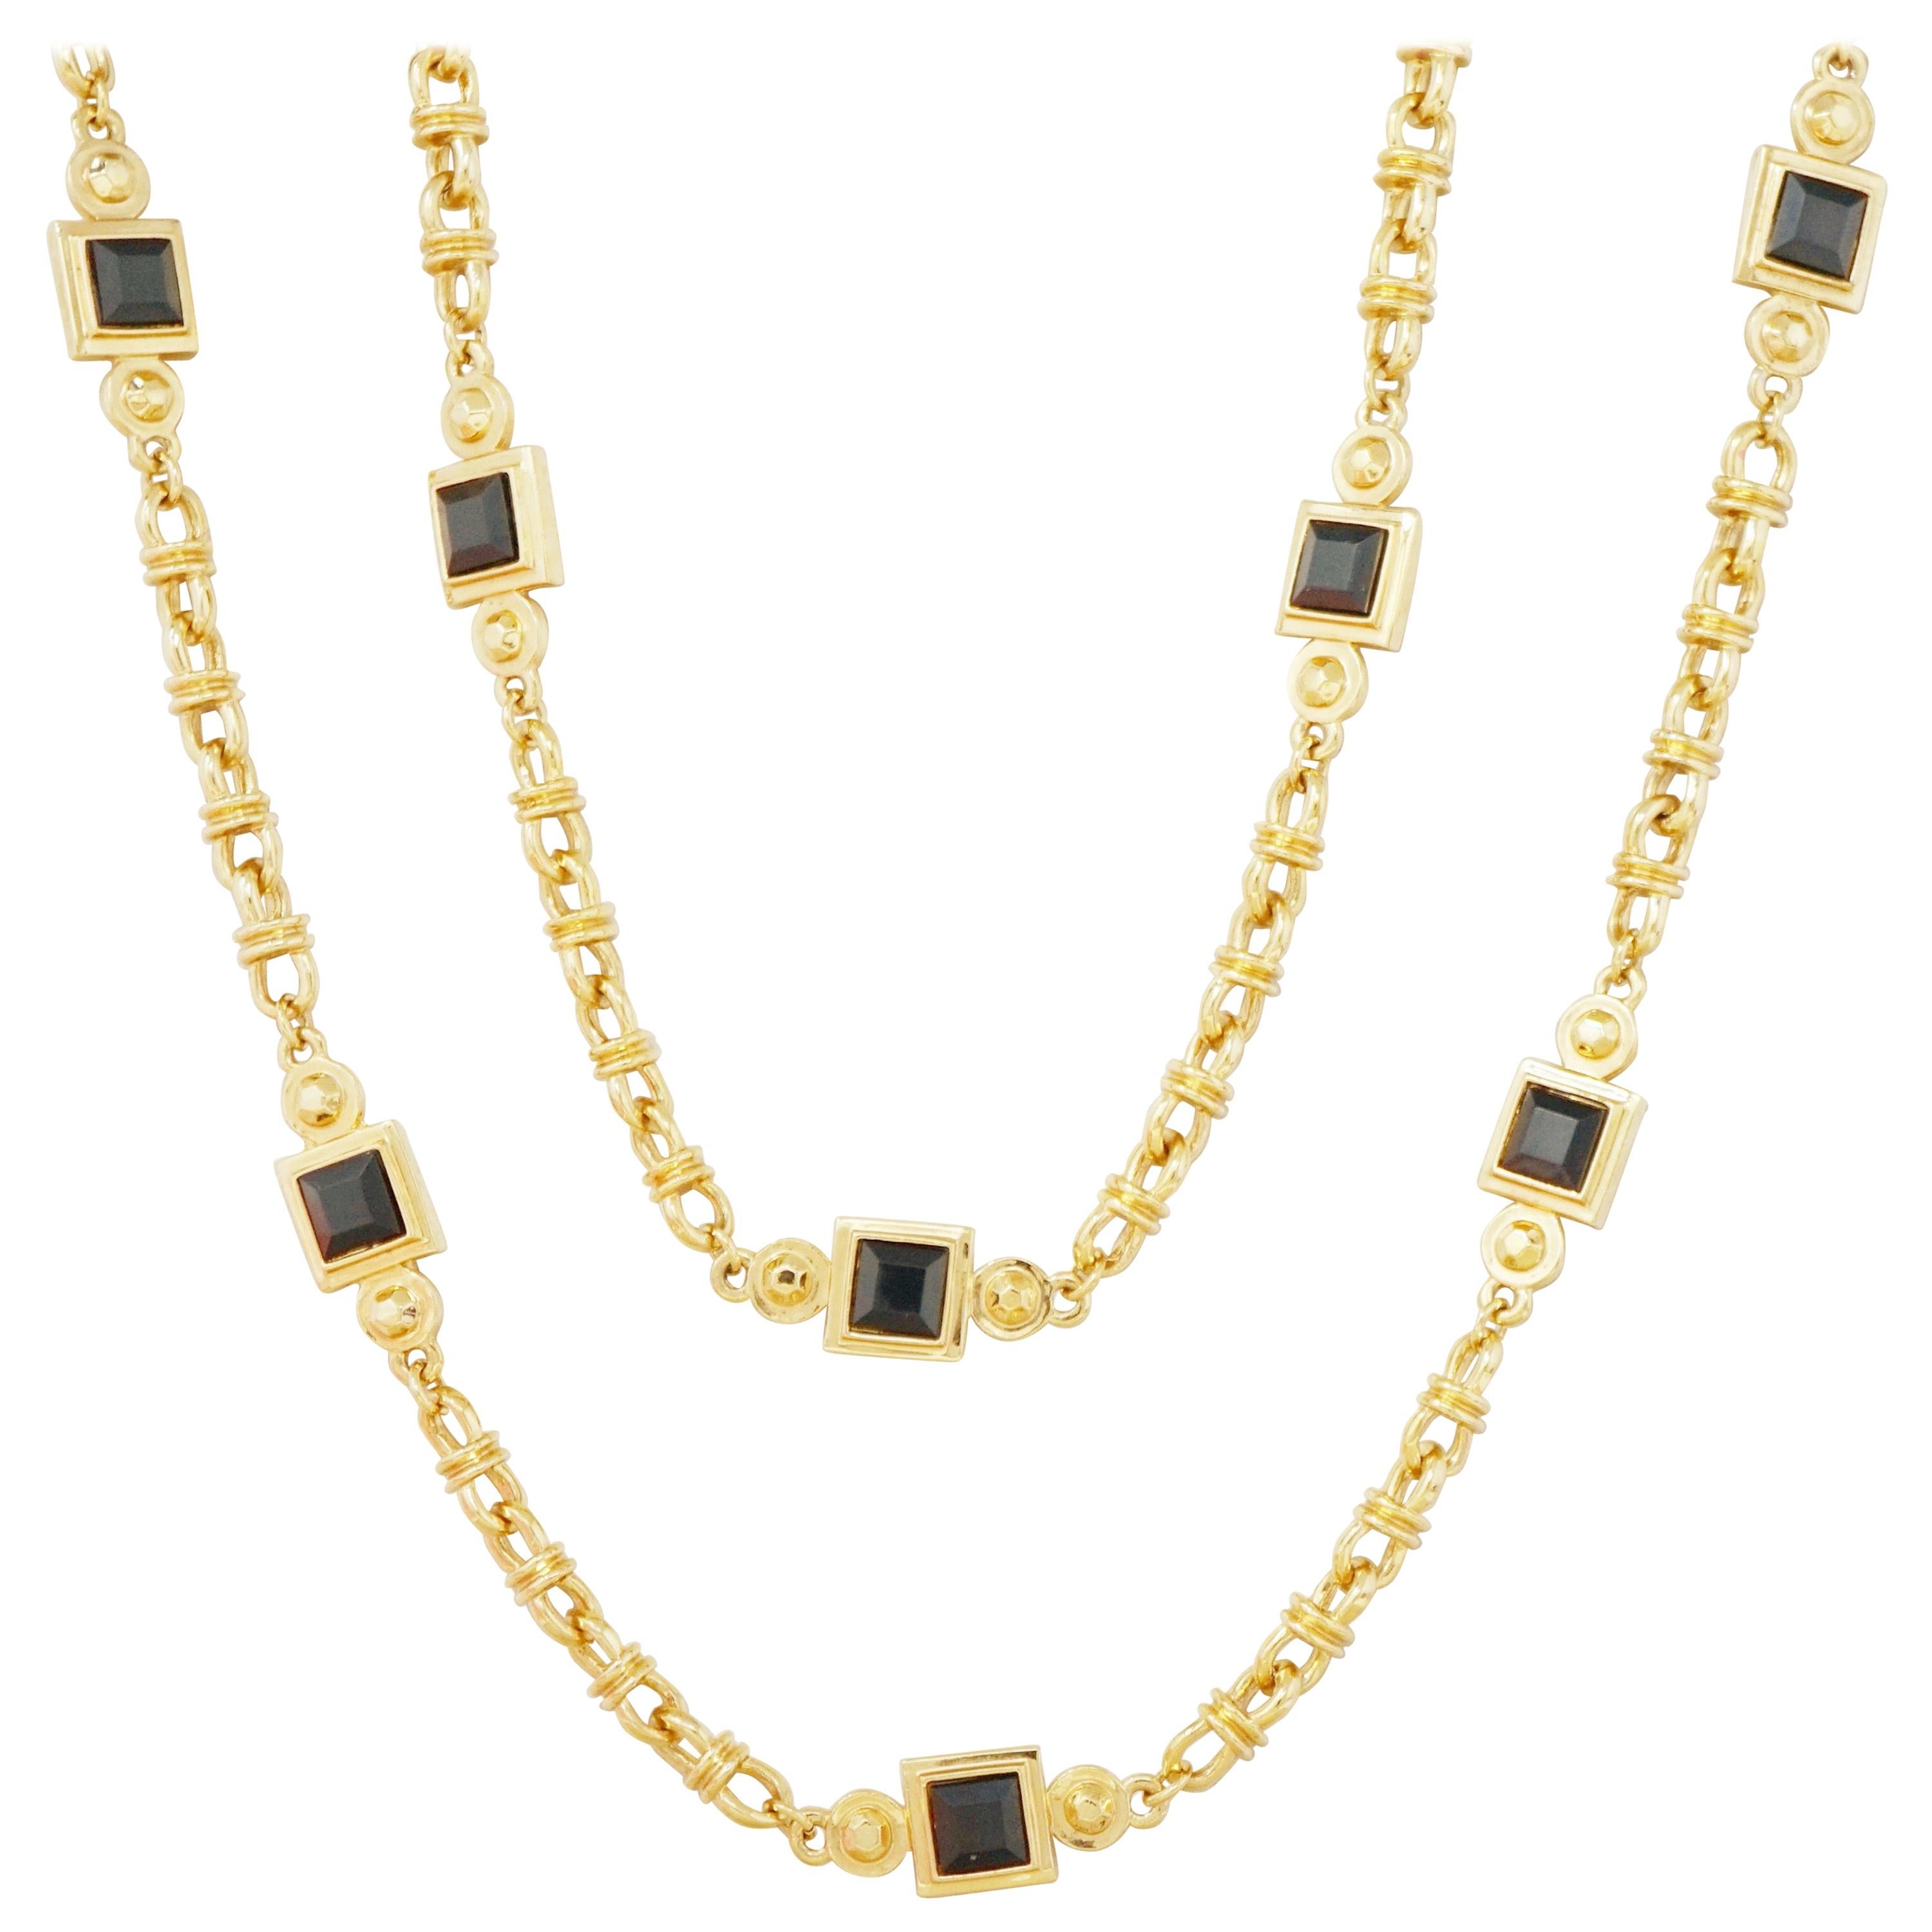 Vintage 42" Gilt & Faceted Onyx Heavy Chain Station Necklace by St. John, 1980s